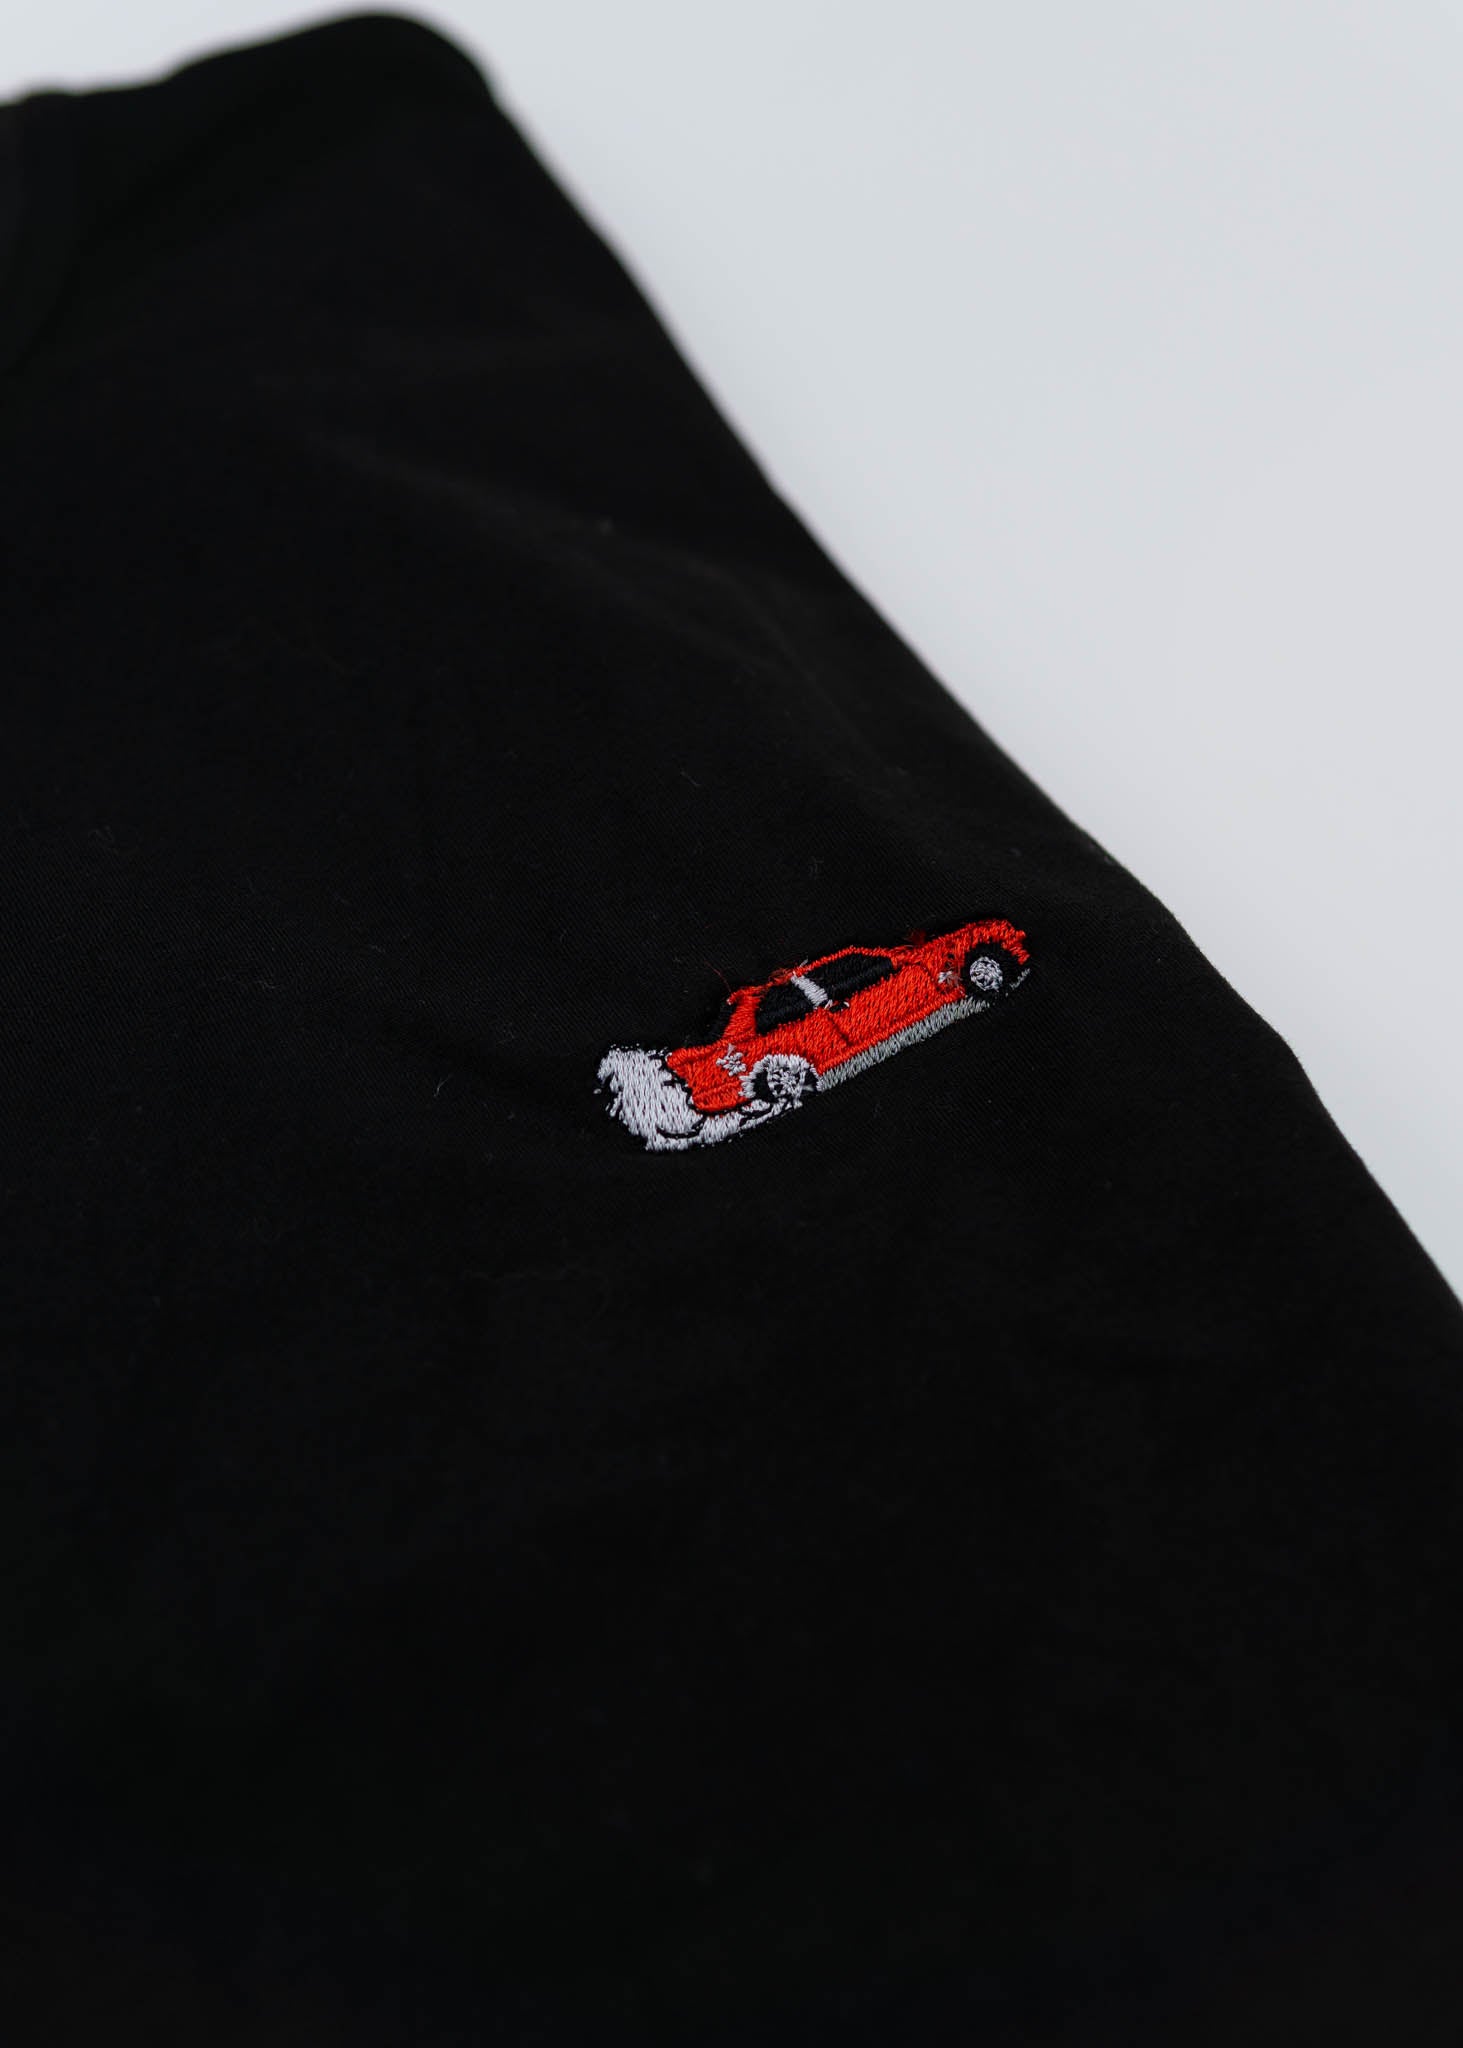 A black BMW/Bimmer E30 M3 T-Shirt for men. Photo is a close up of the shirt with an embroidered Red BMW E30 M3 Coupe. Fabric composition is 100% polyester. The material is very stretchy, soft, comfortable, breathable, and non-transparent. The style of this shirt is short sleeve, with a crewneck neckline.